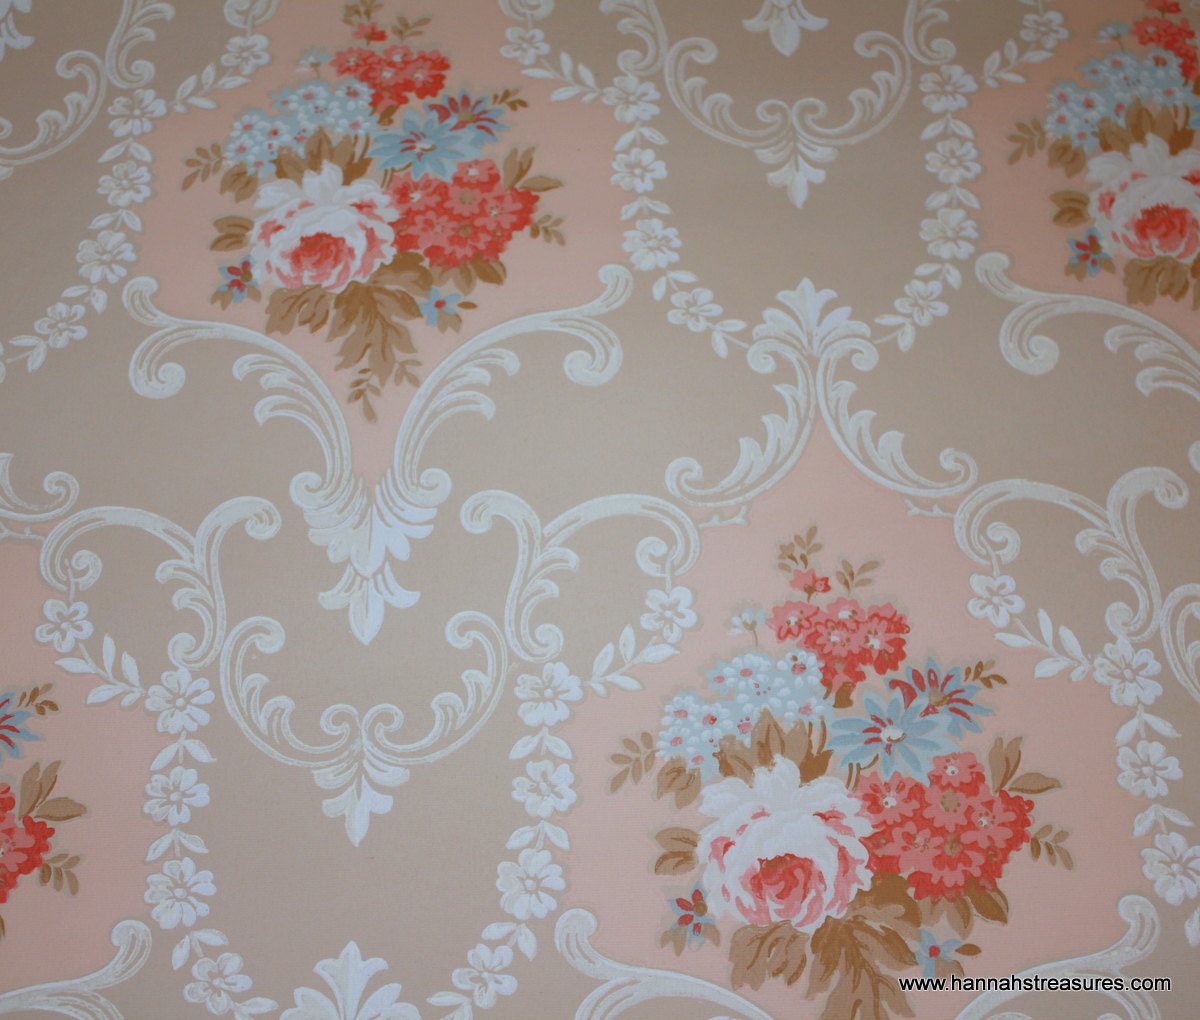 S Vintage Wallpaper Cabbage Rose Floral By Hannahstreasures